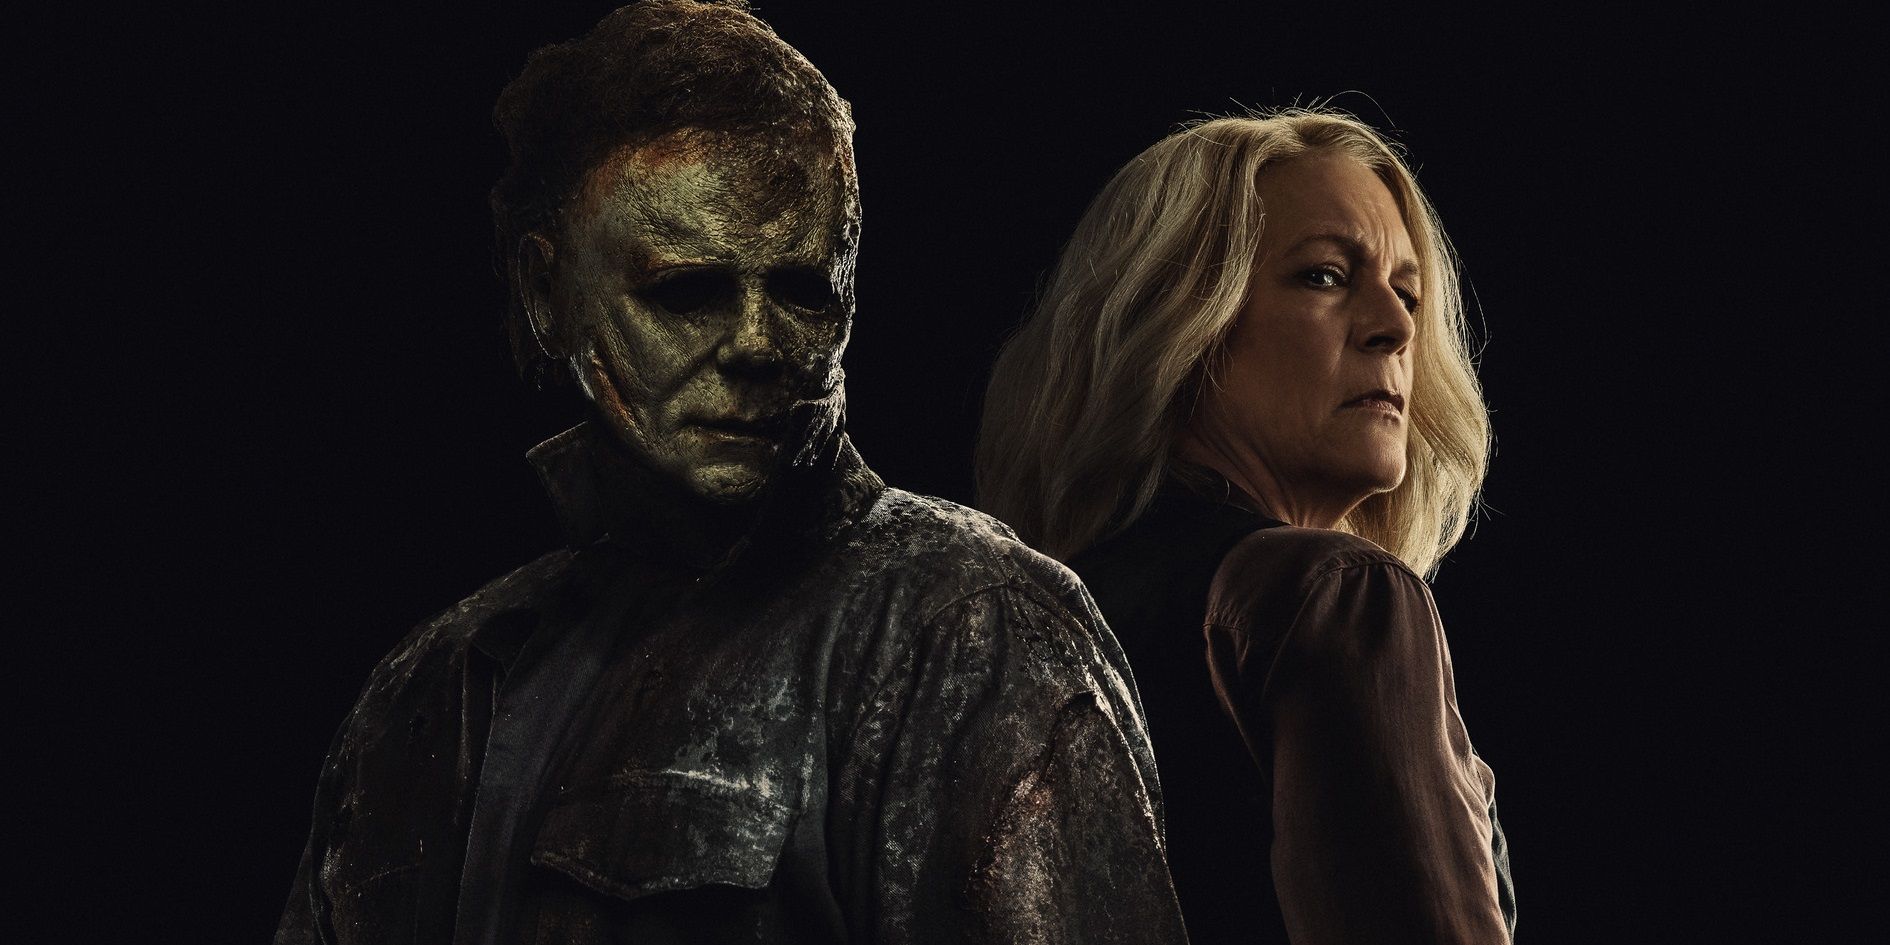 Laurie and Michael on the poster for Halloween Ends